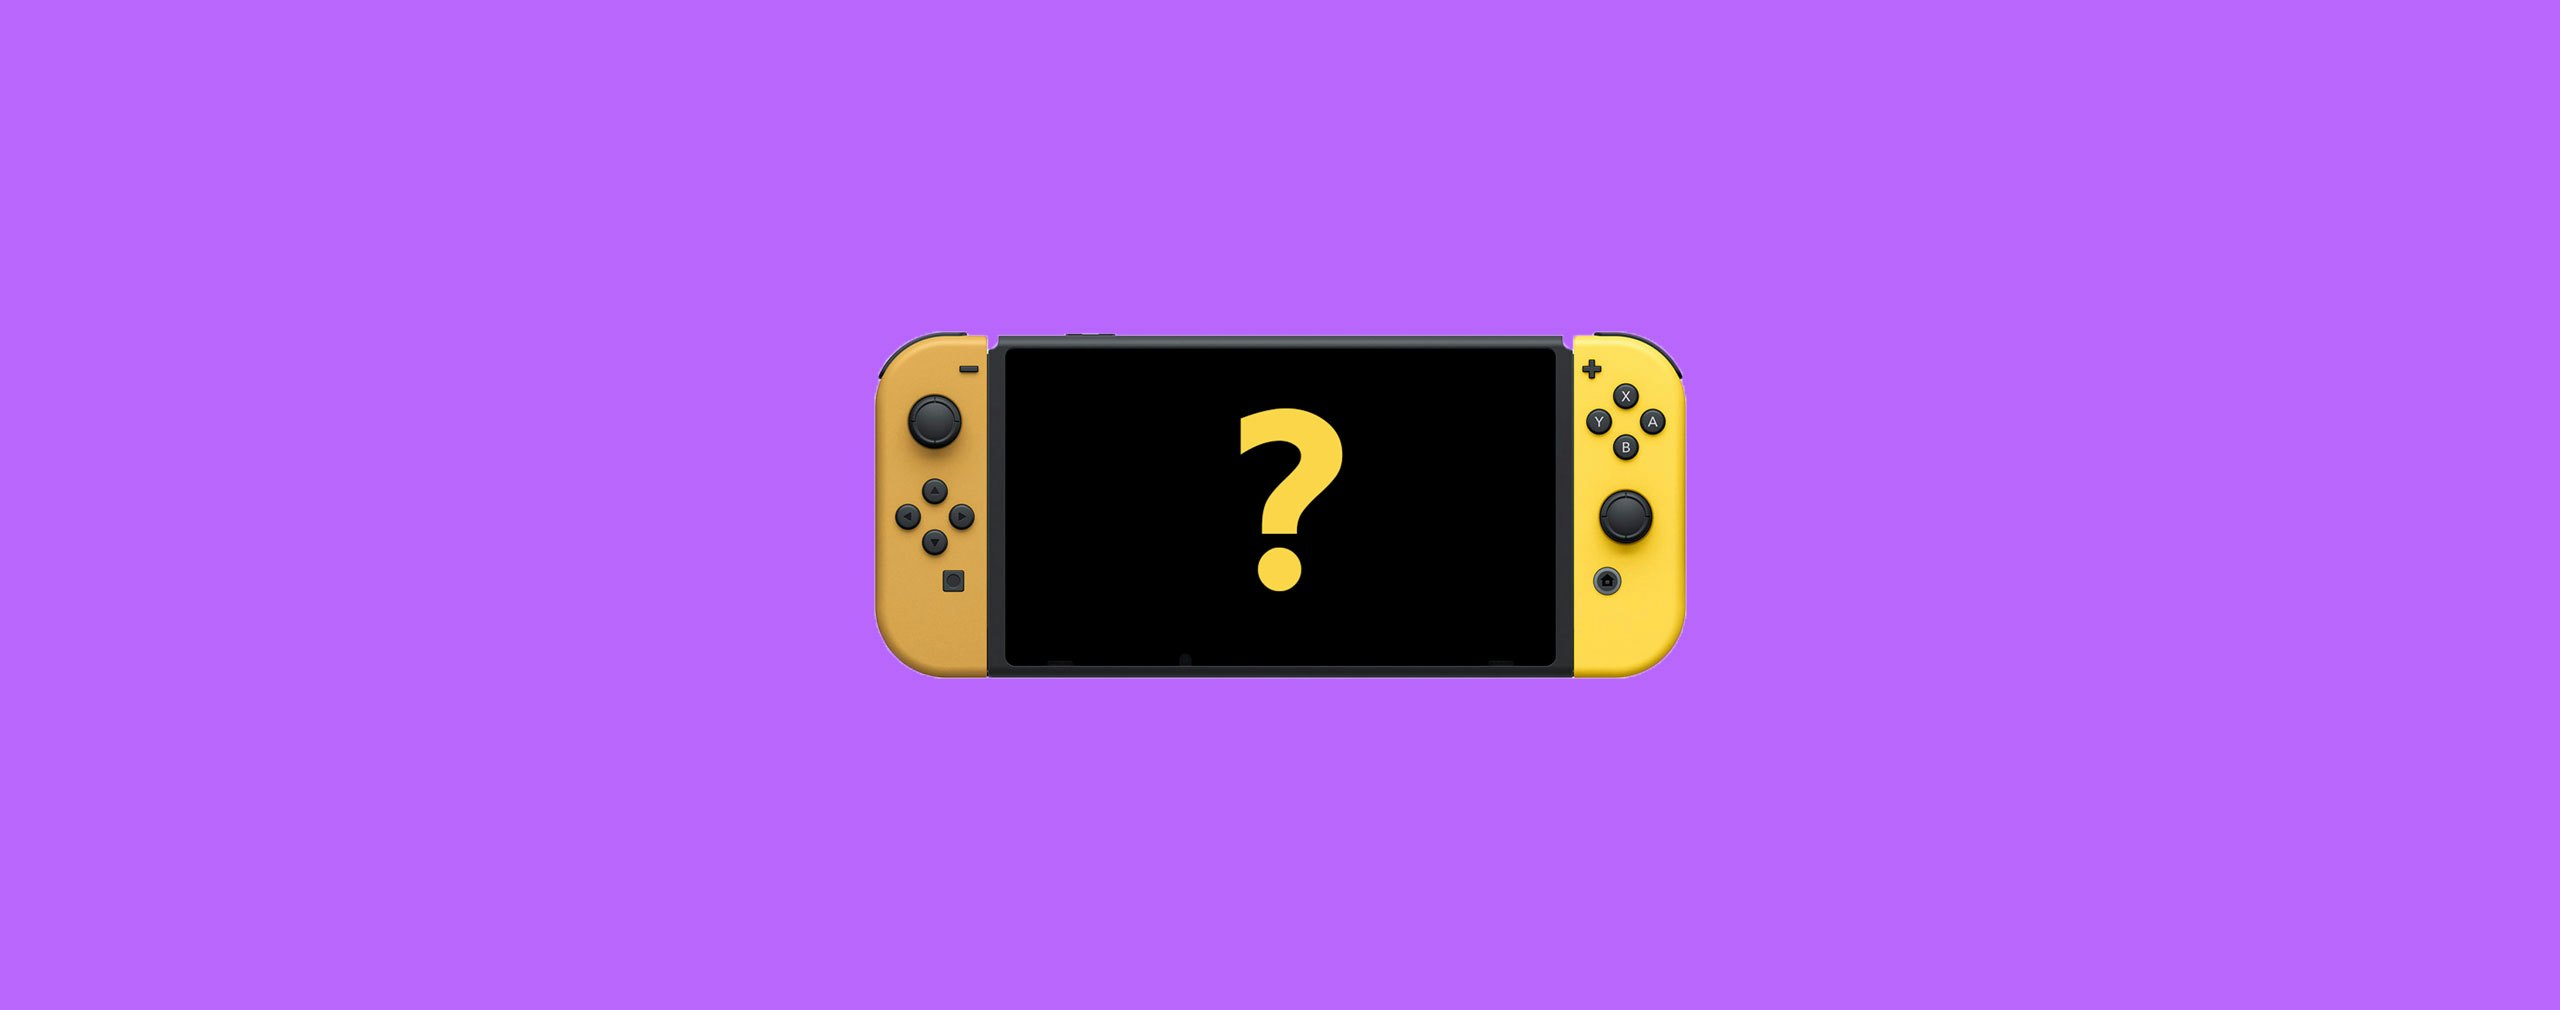 is there going to be a new switch